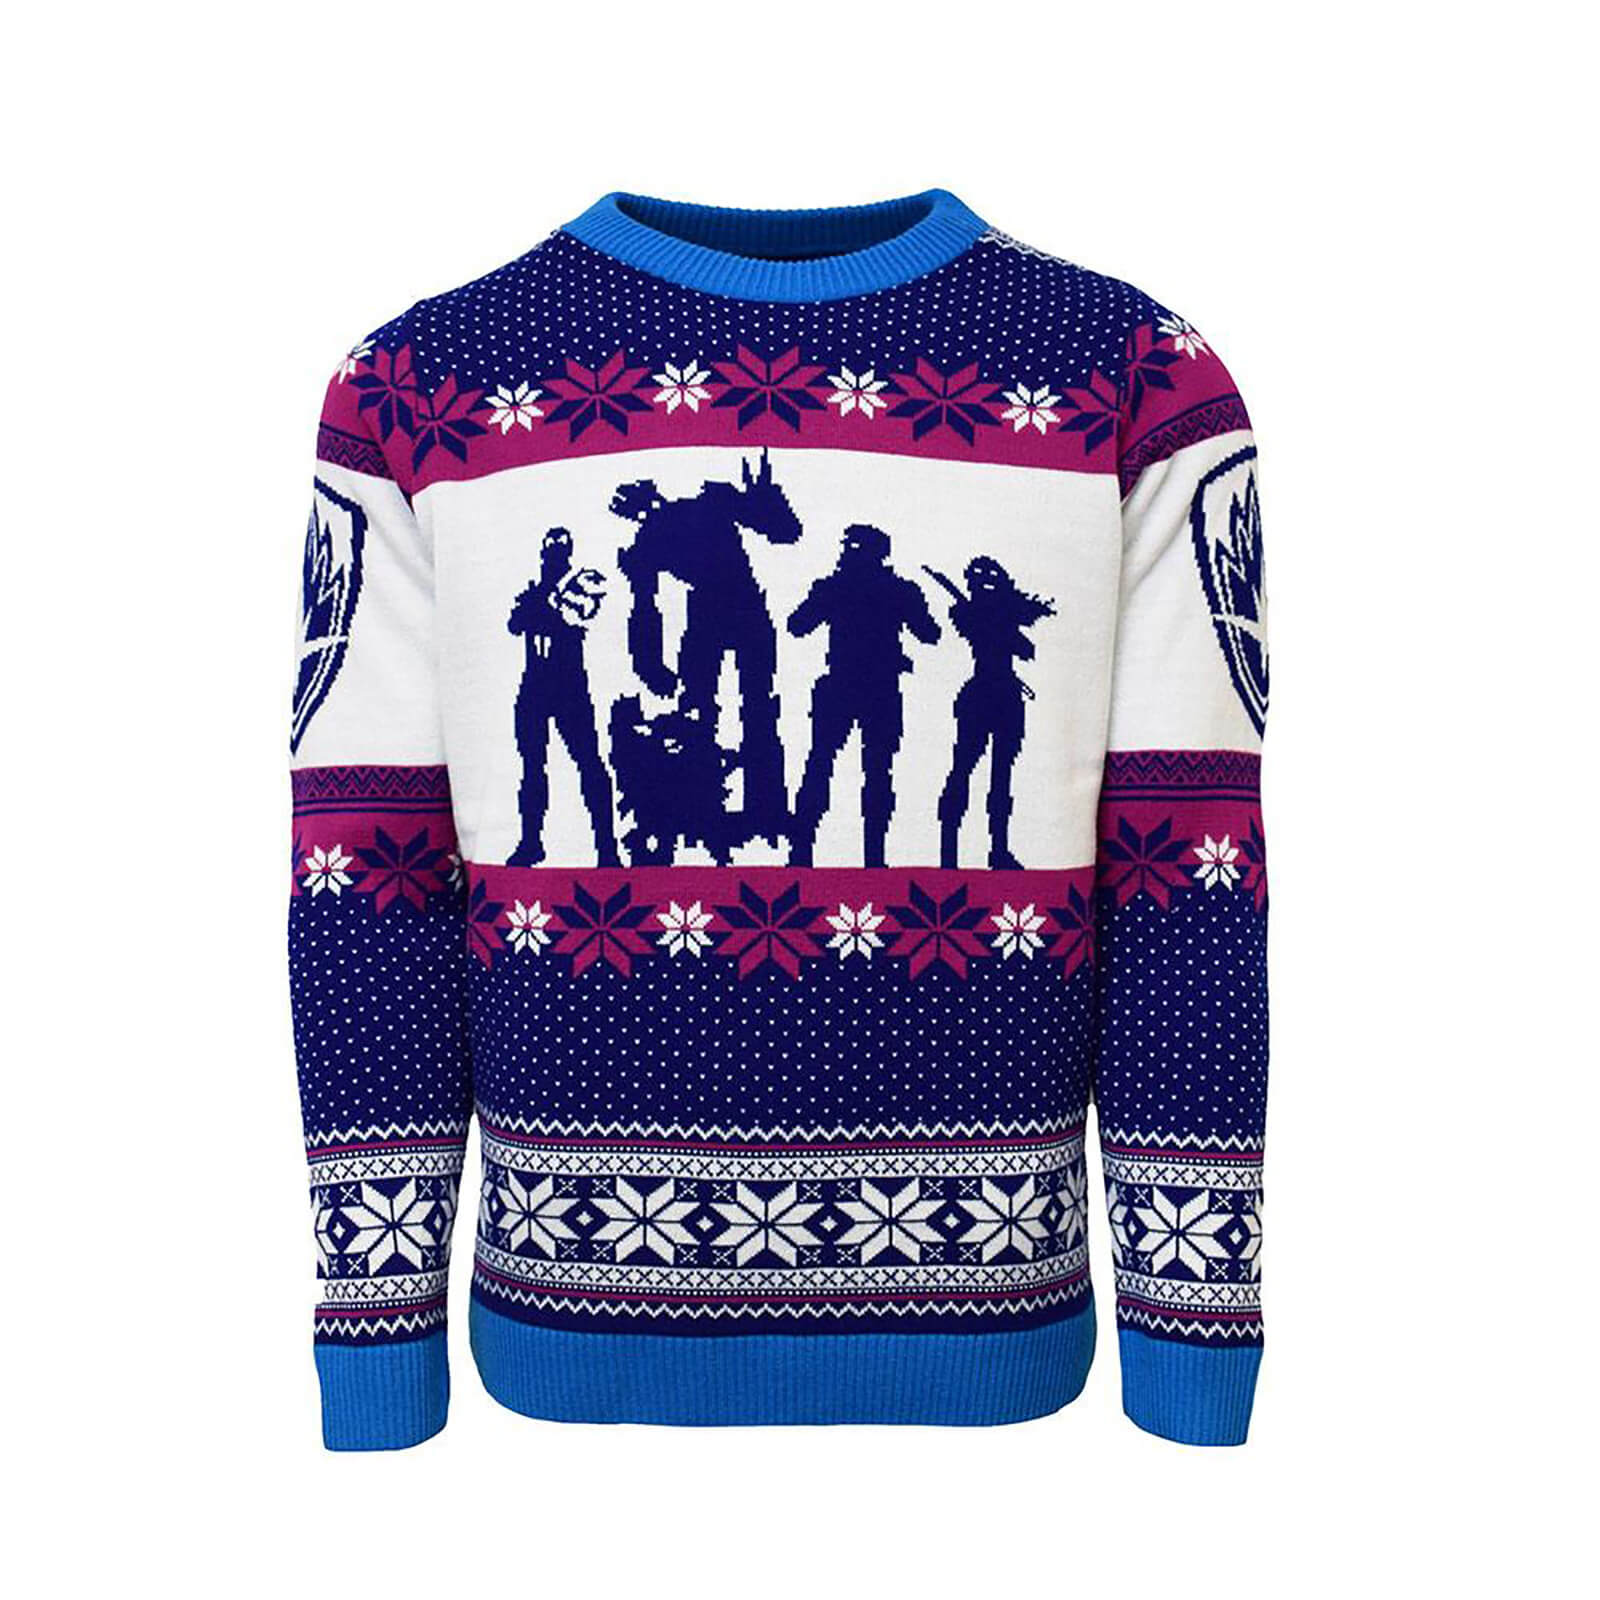 Guardians Of The Galaxy Christmas Jumper - Blue - S